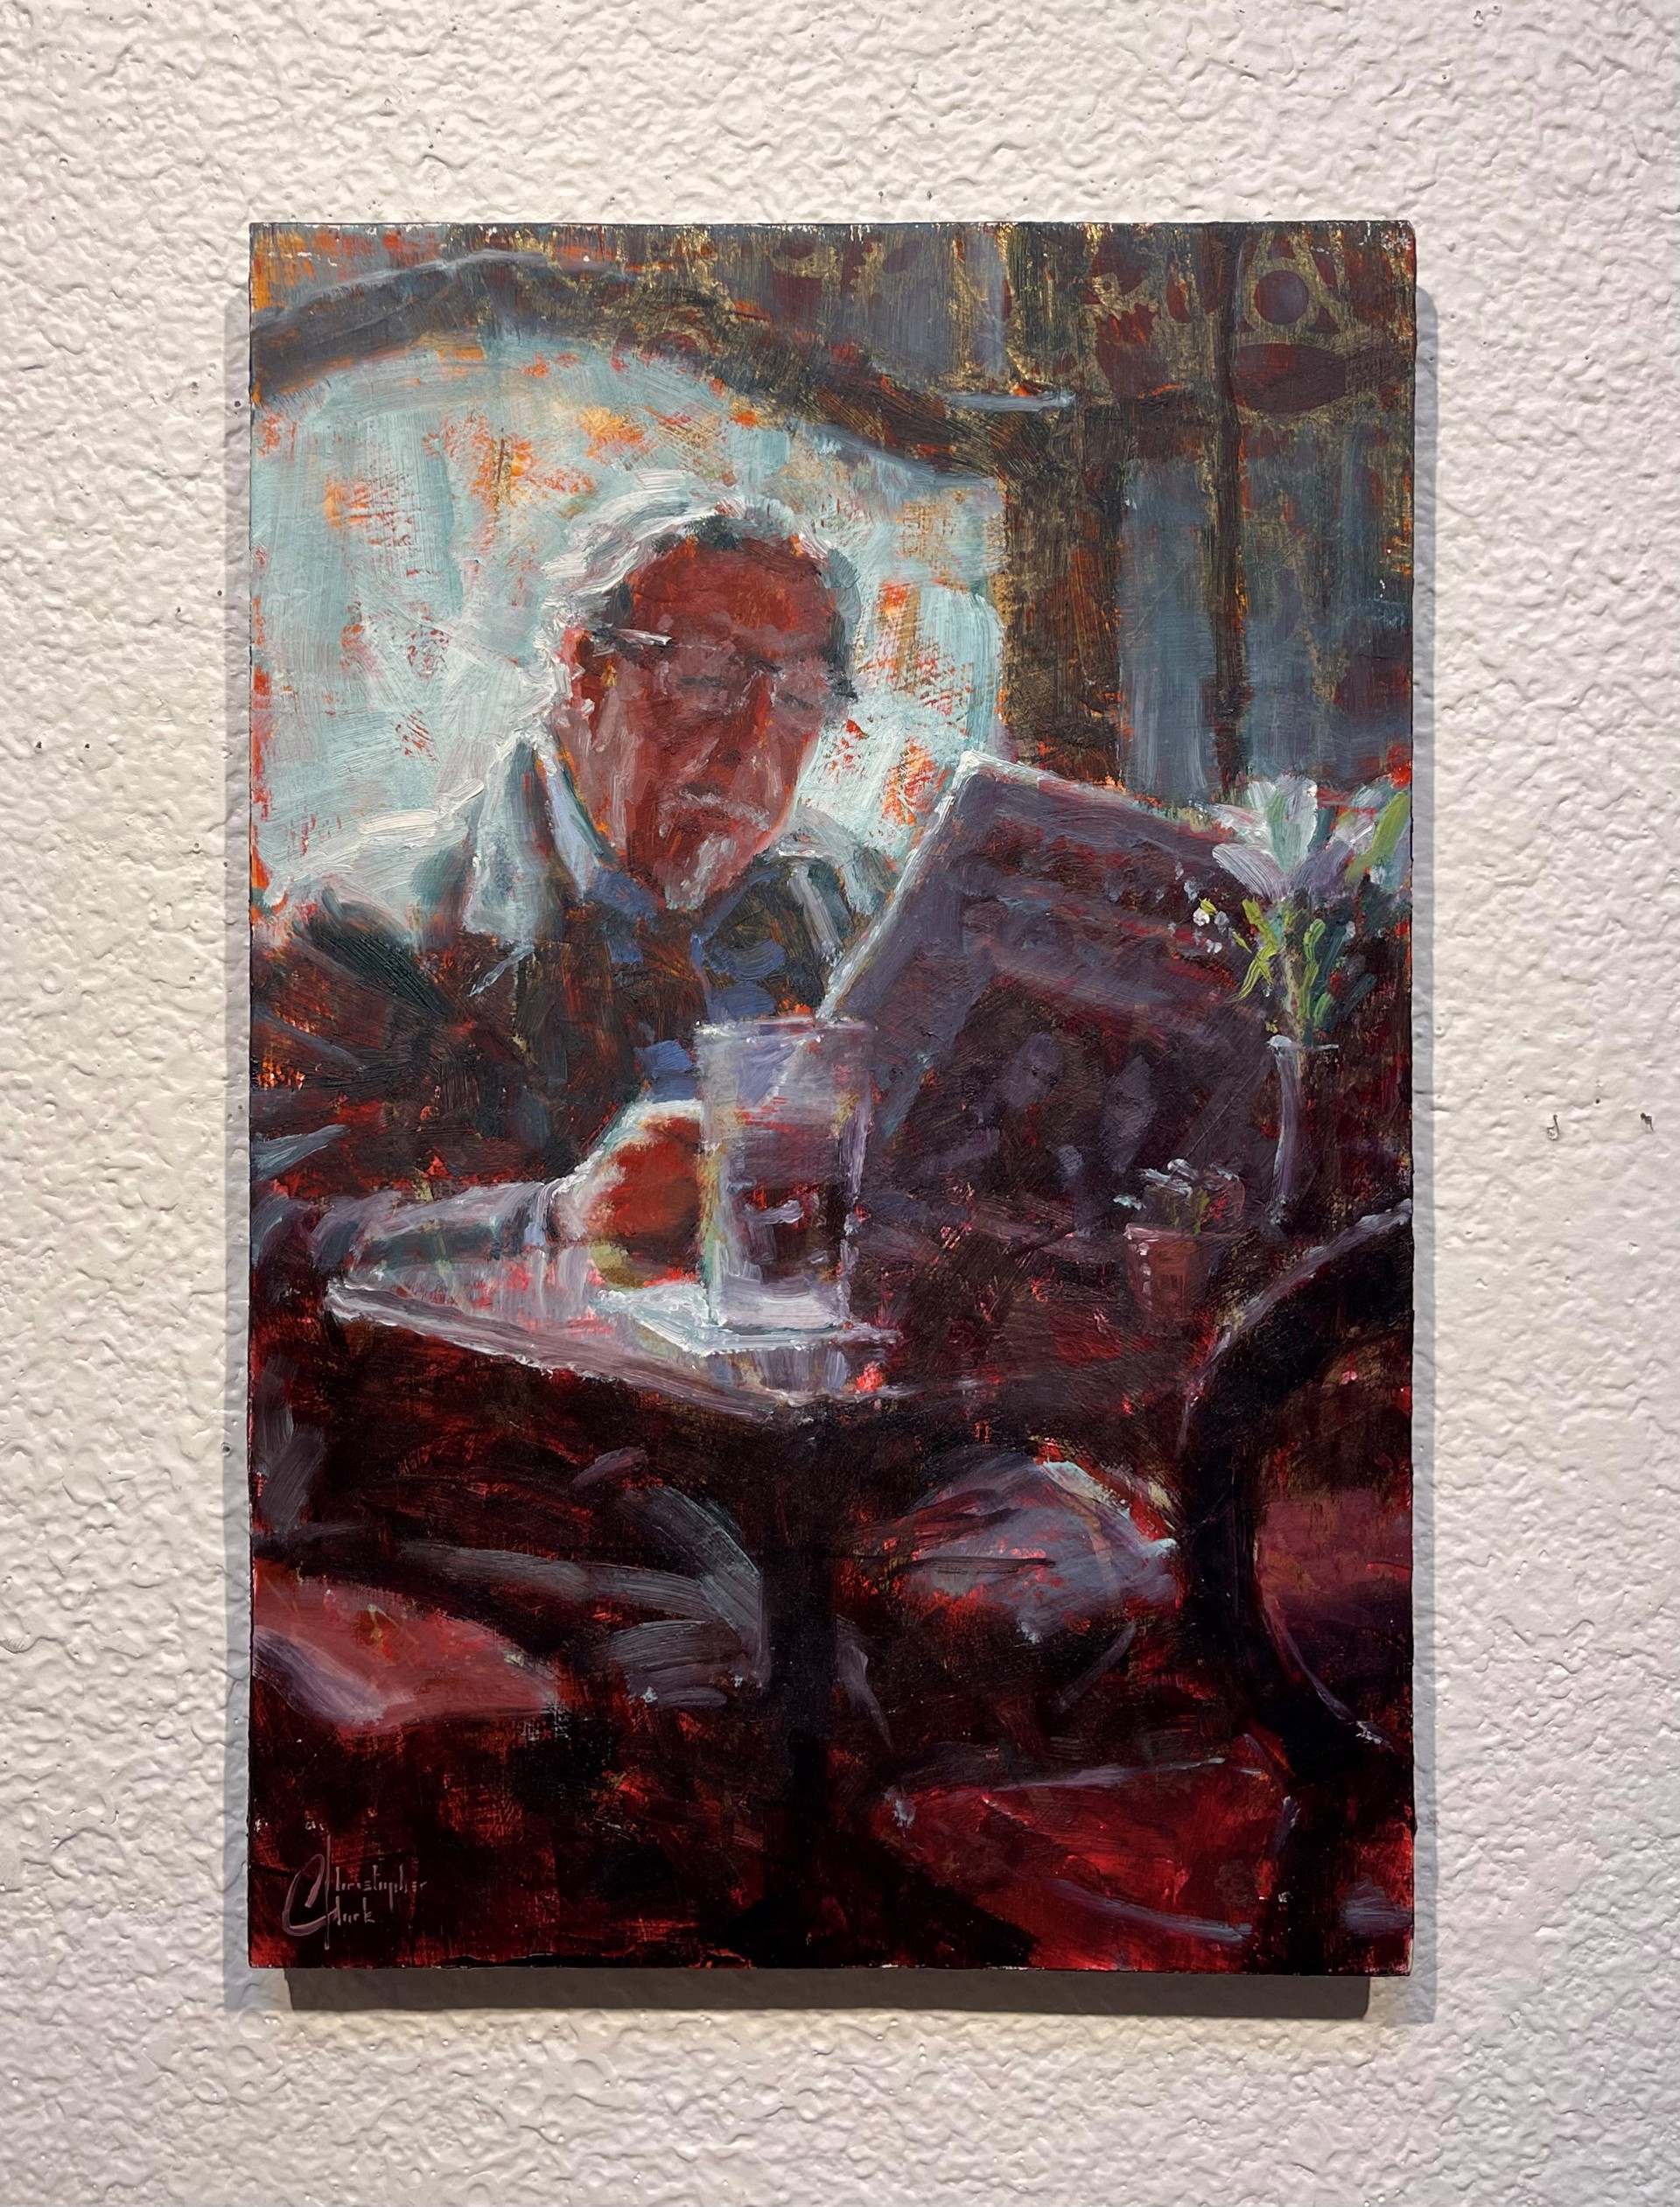 Morning Paper in the Pub by Christopher Clark